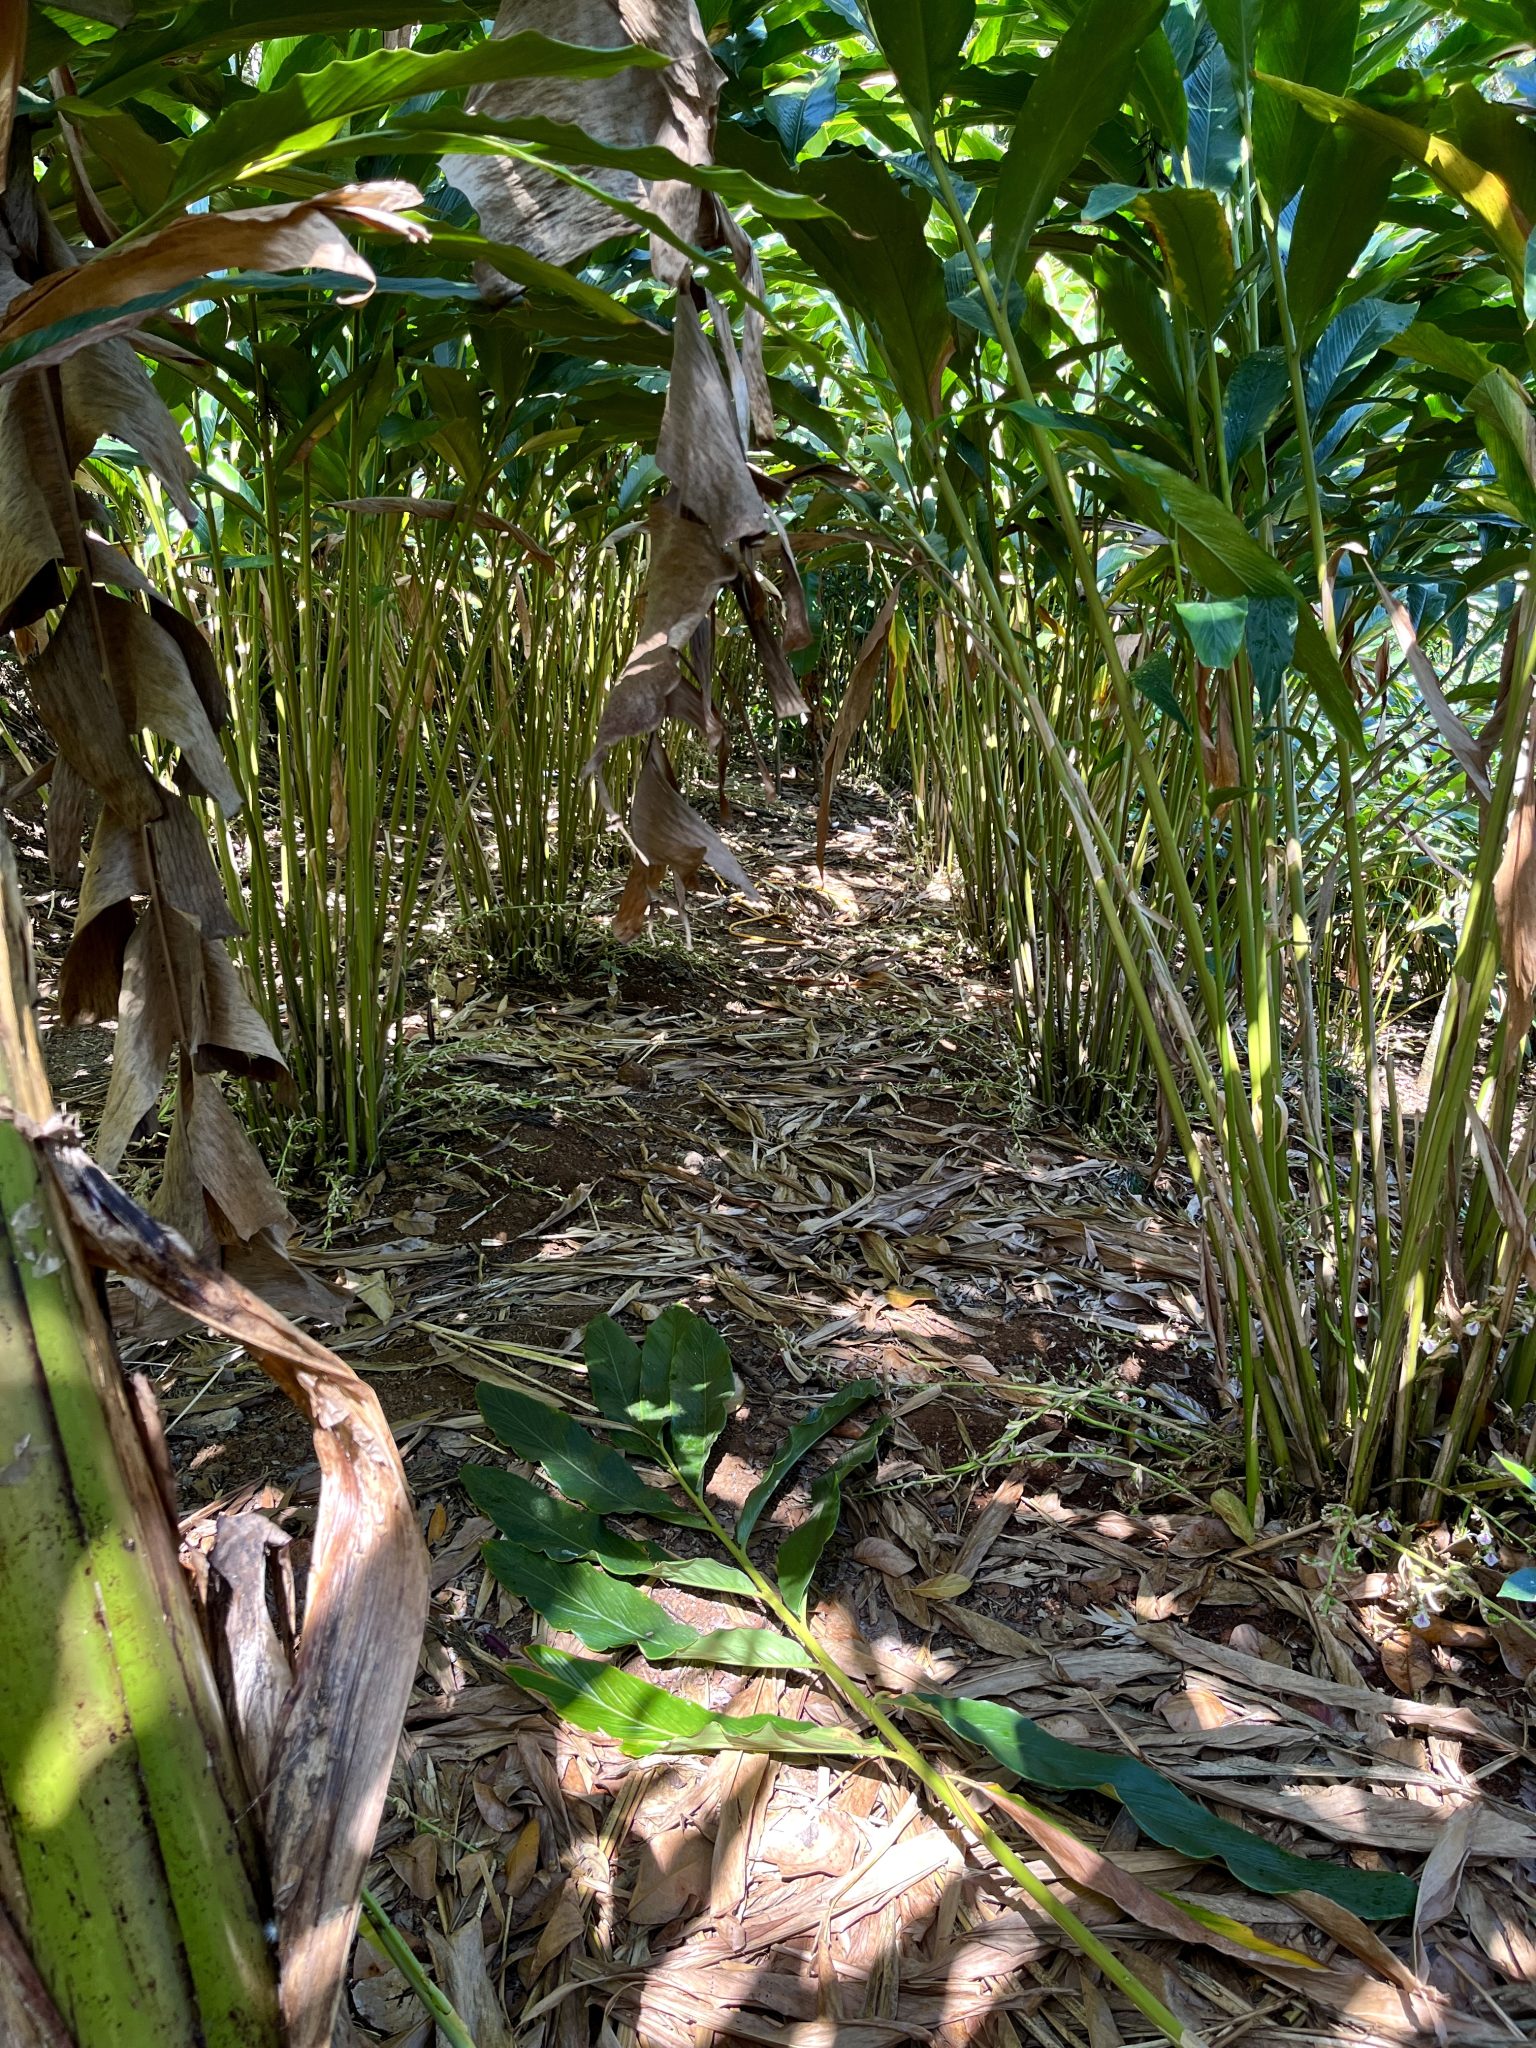 Cardamom plantation. A look between rows of plants, near the ground, with the plants closing in overhead.